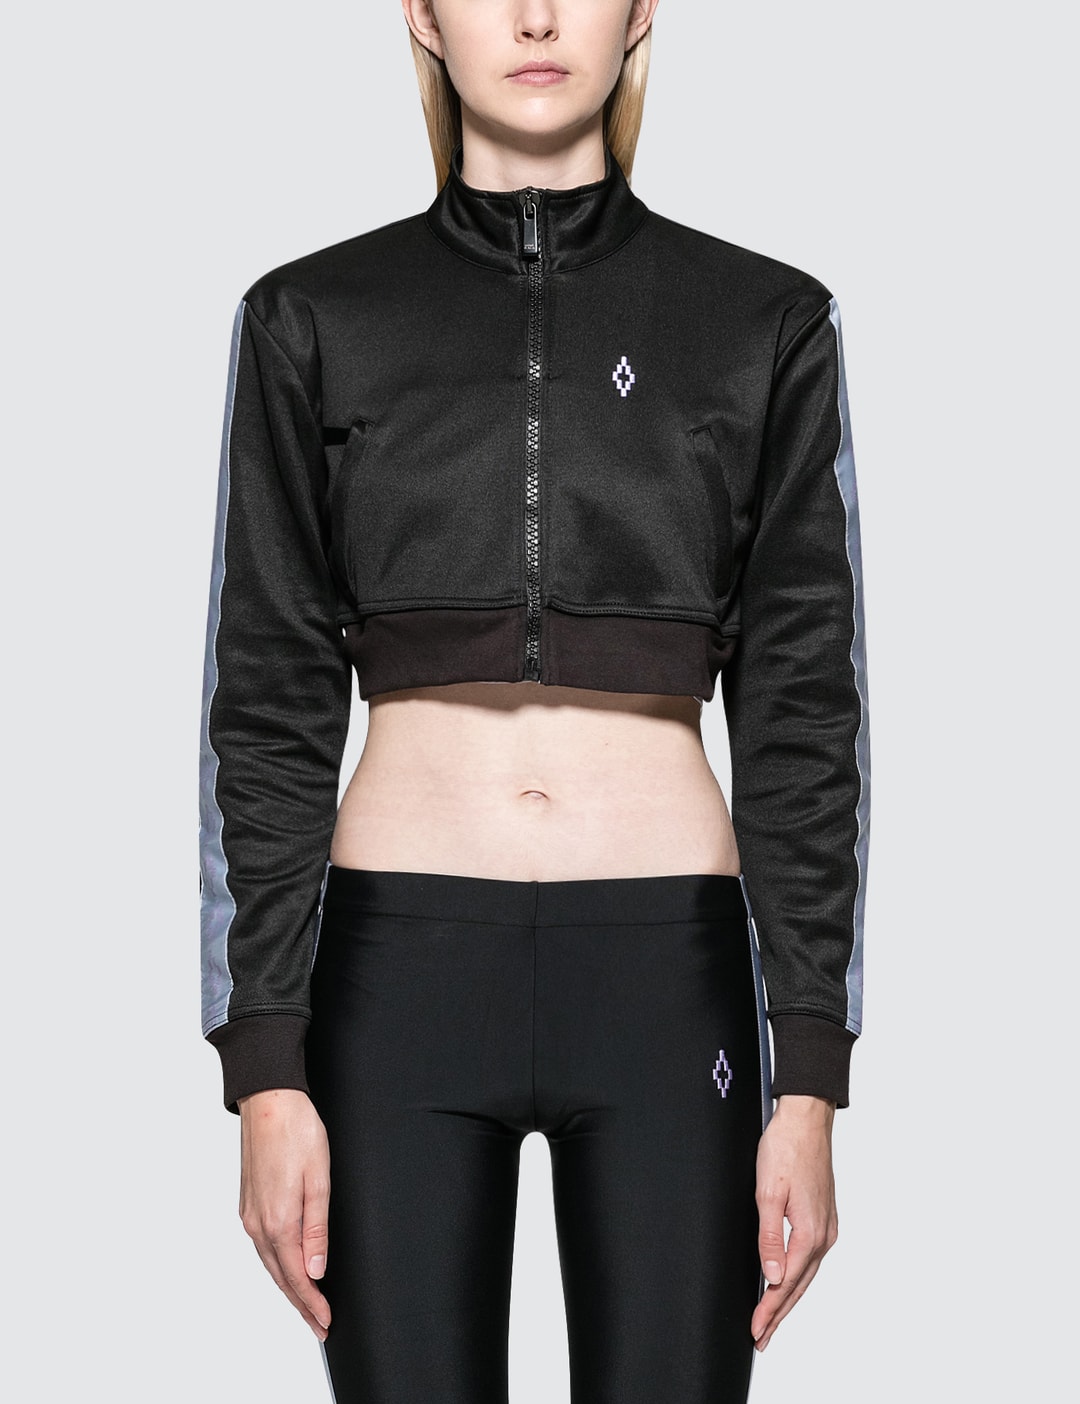 Marcelo Burlon - Cross Tape Track Jacket | HBX - Globally Curated Fashion and Lifestyle by